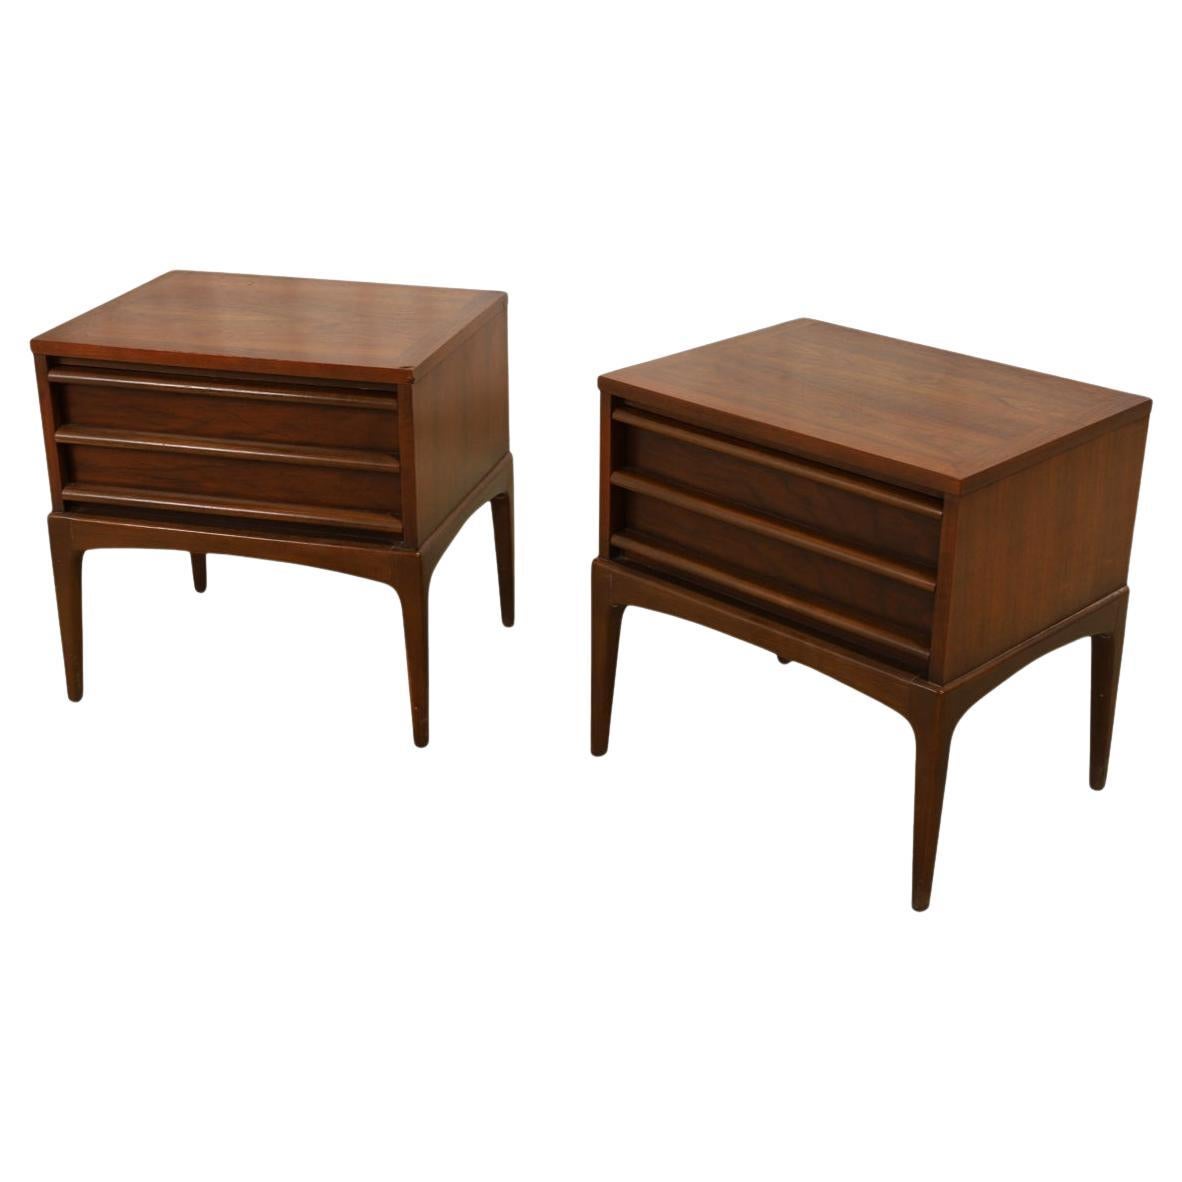 Pair Mid century rhythm Lane walnut single drawer nightstands. Designed and manufactured by Lane in Alta Vista VA. Walnut solid oak drawer construction with carved handle pulls. Very well built and beautiful pair of matching bedside or end tables or